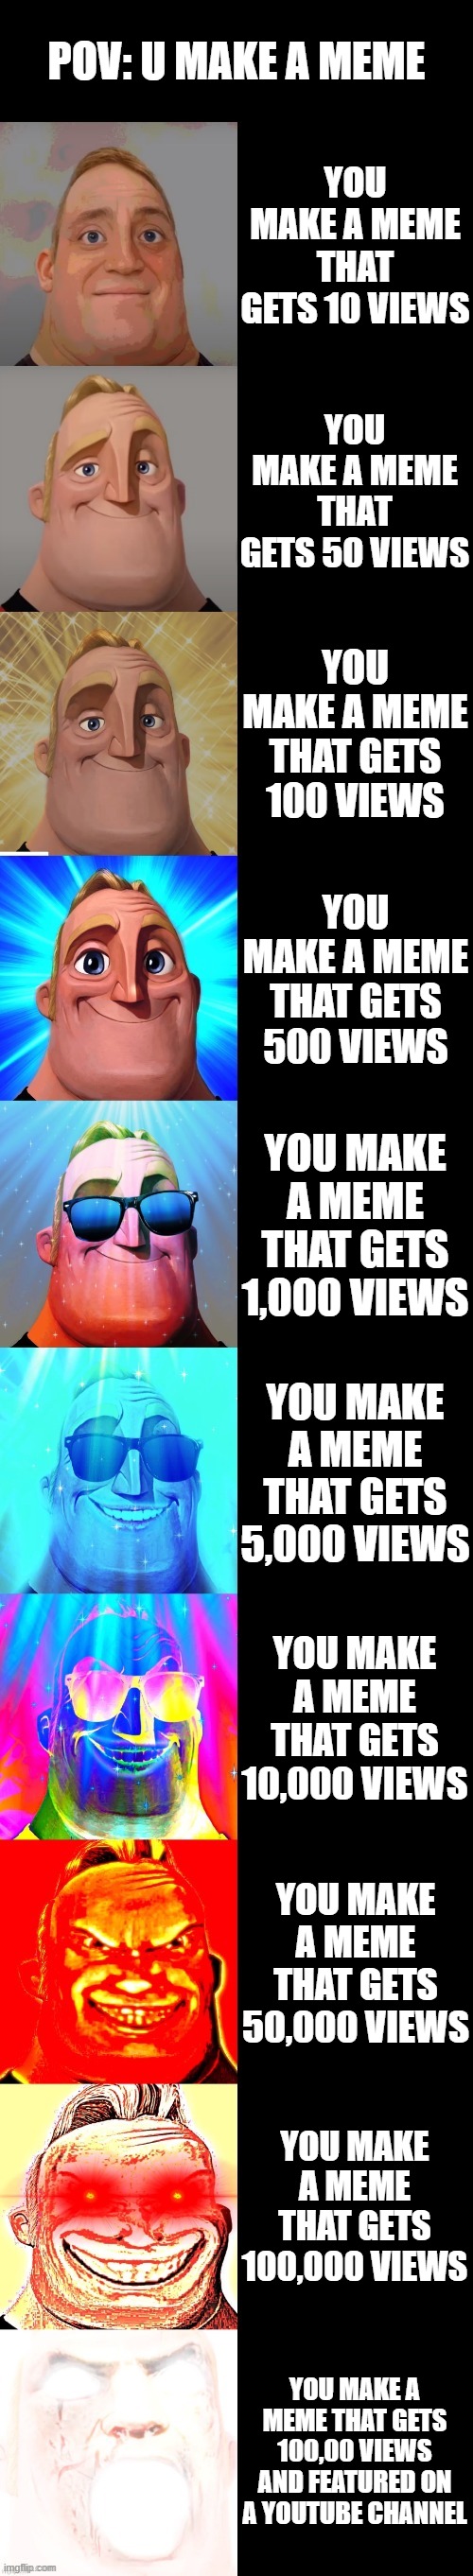 POV: Views |  POV: U MAKE A MEME; YOU MAKE A MEME THAT GETS 10 VIEWS; YOU MAKE A MEME THAT GETS 50 VIEWS; YOU MAKE A MEME THAT GETS 100 VIEWS; YOU MAKE A MEME THAT GETS 500 VIEWS; YOU MAKE A MEME THAT GETS 1,000 VIEWS; YOU MAKE A MEME THAT GETS 5,000 VIEWS; YOU MAKE A MEME THAT GETS 10,000 VIEWS; YOU MAKE A MEME THAT GETS 50,000 VIEWS; YOU MAKE A MEME THAT GETS 100,000 VIEWS; YOU MAKE A MEME THAT GETS 100,00 VIEWS AND FEATURED ON A YOUTUBE CHANNEL | image tagged in mr incredible becoming canny,imgflip,funny,memes,views,laugh | made w/ Imgflip meme maker